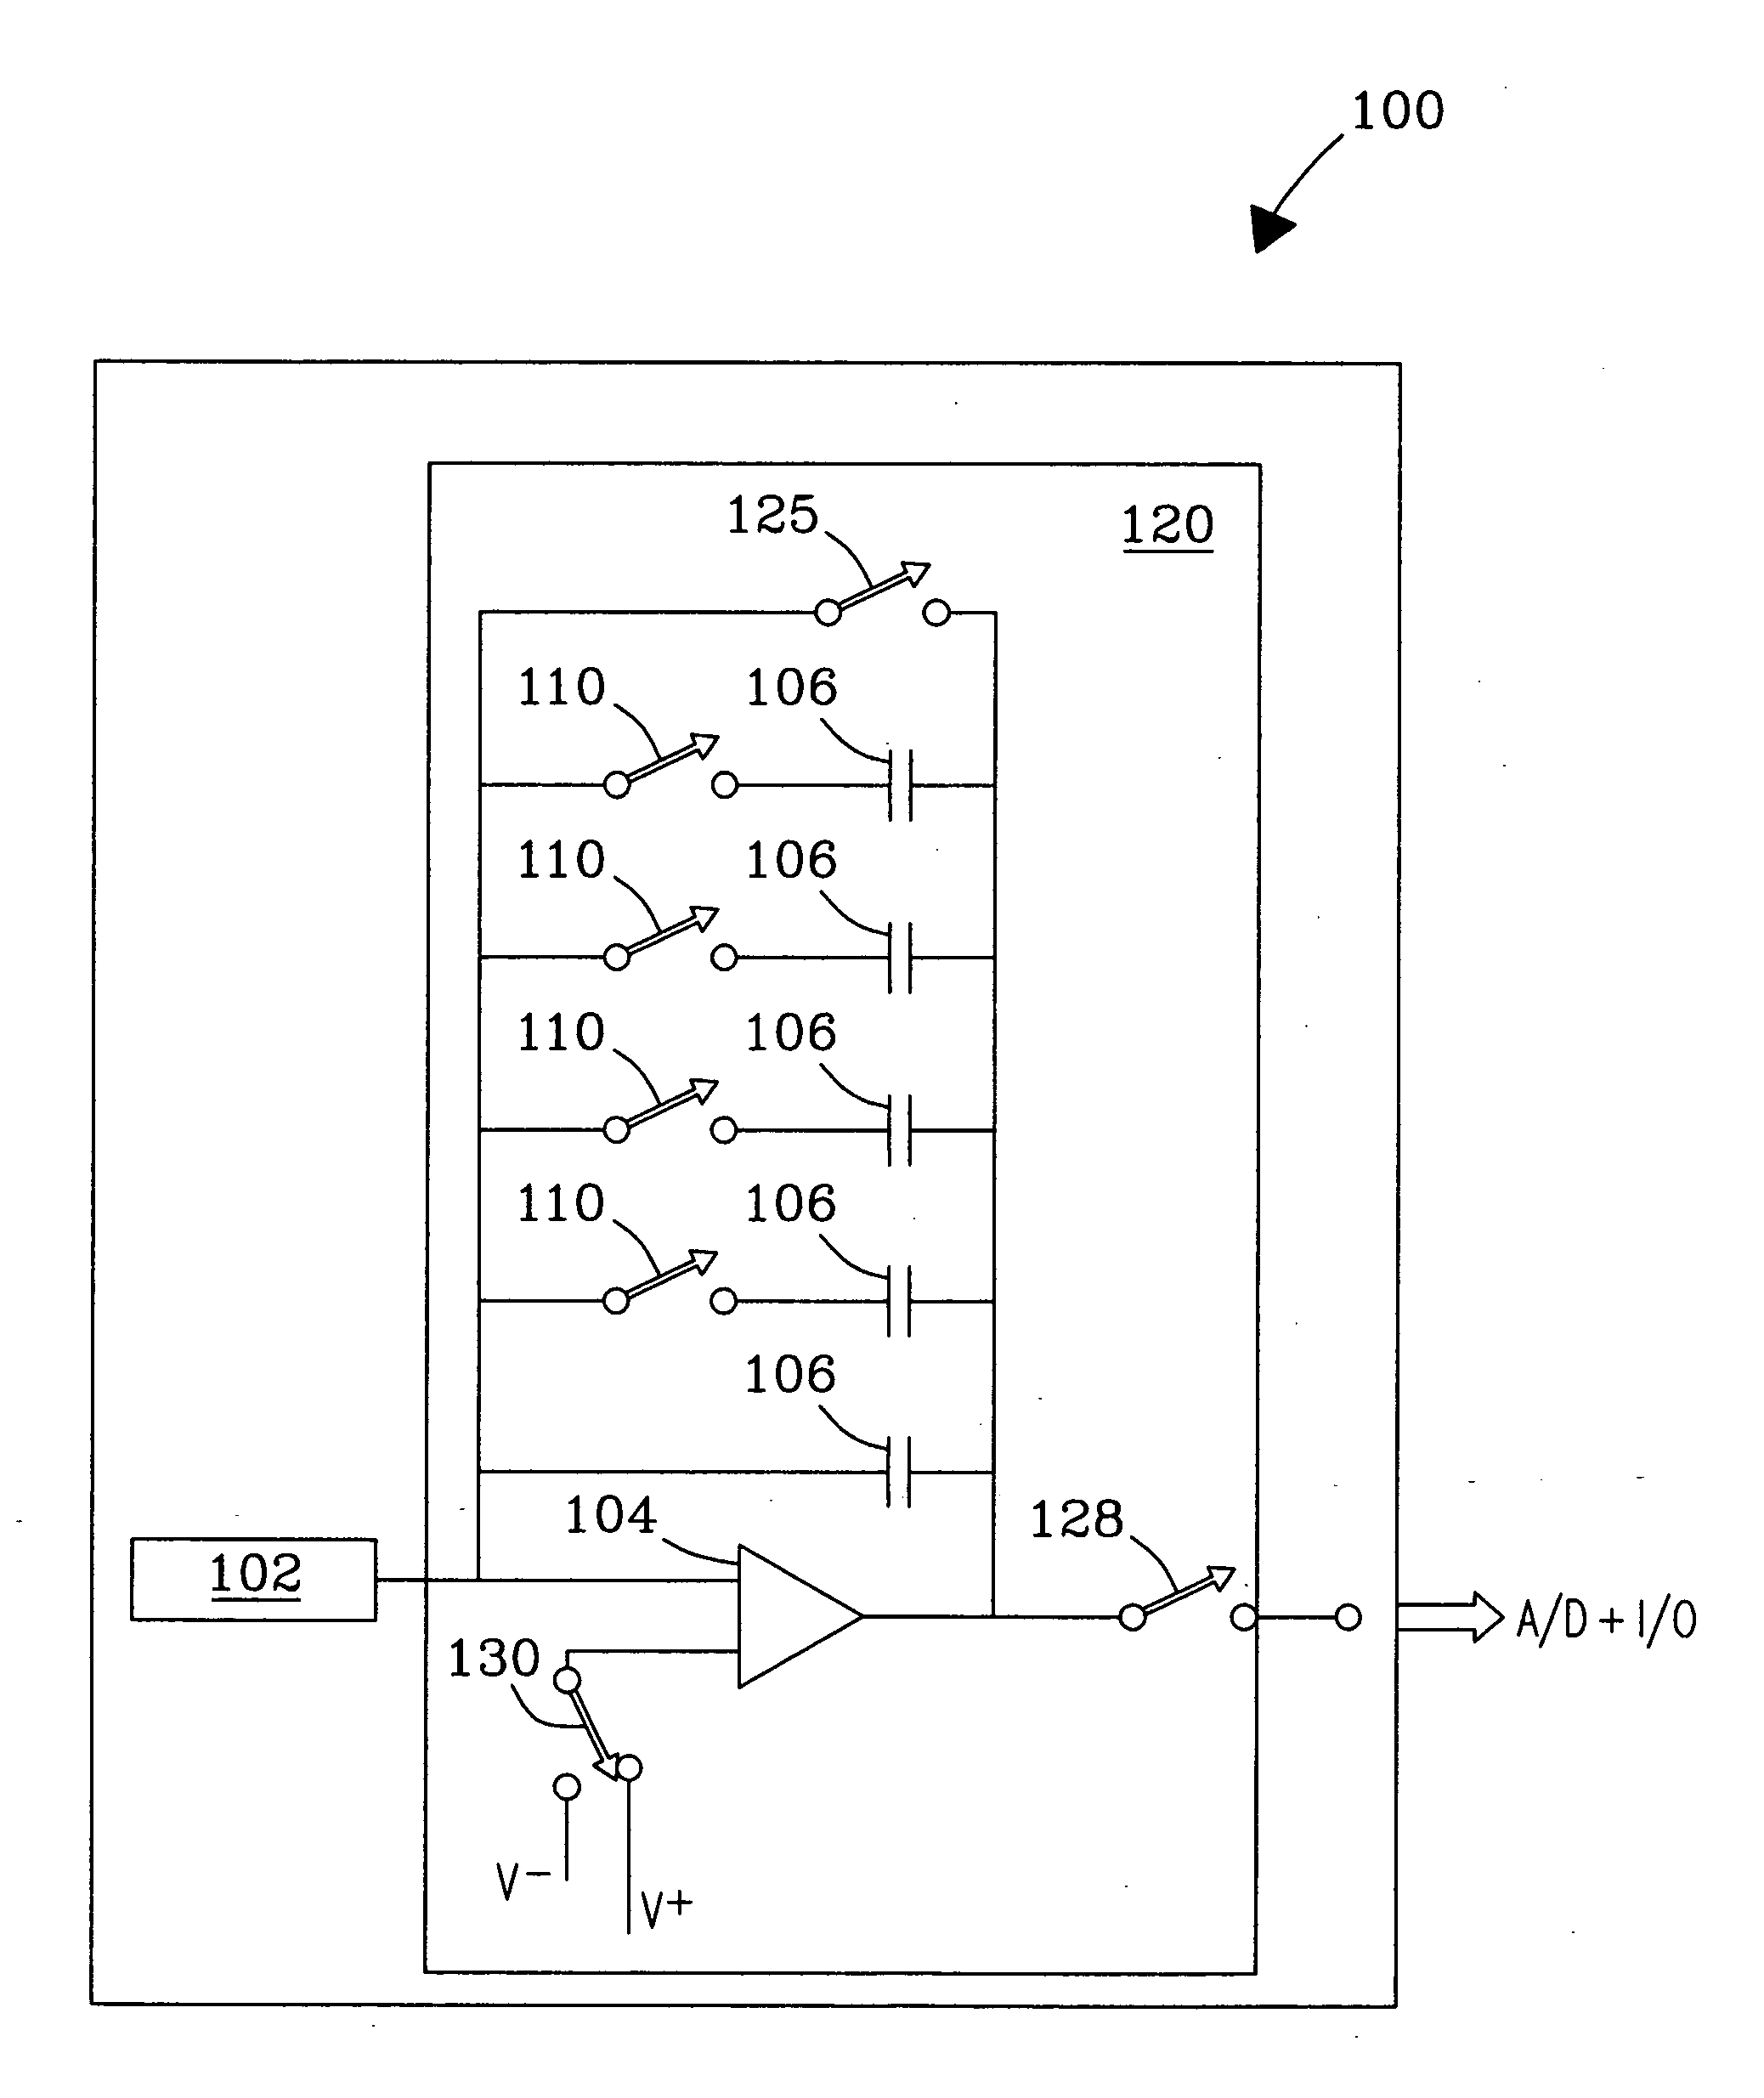 Method and apparatus for simultaneous detection and measurement of charged particles at one or more levels of particle flux for analysis of same